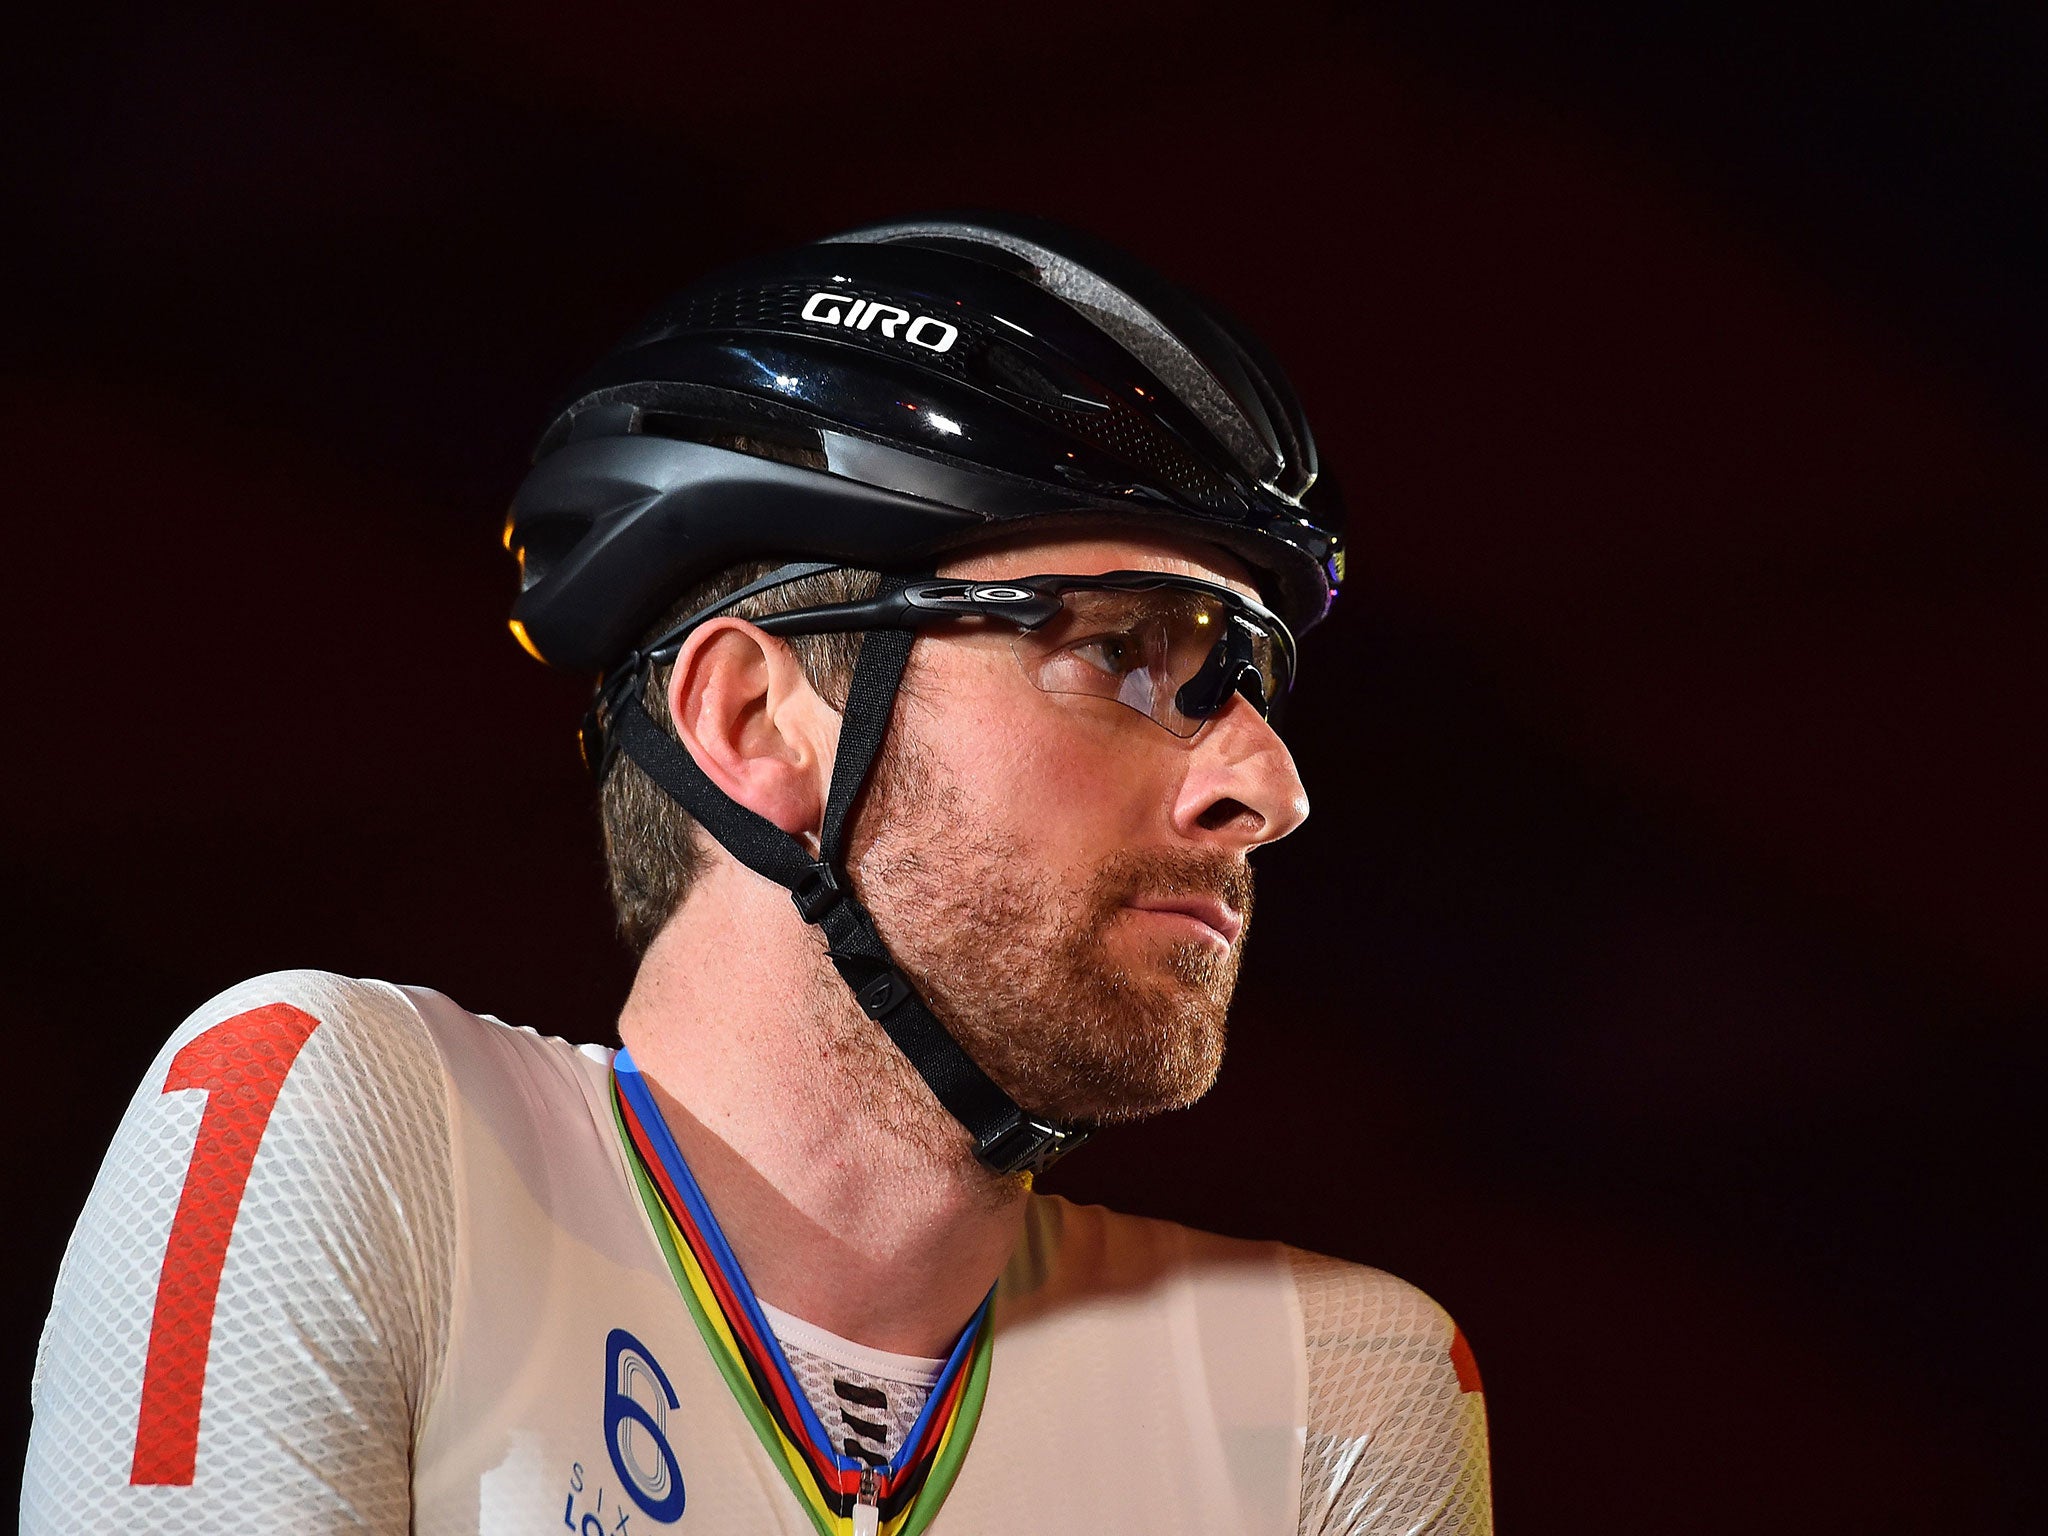 On 72 points, Wiggins and Mark Cavendish lie 18 points behind leaders Kenny de Ketele and Moreno de Pauw, the pair who beat them in the London Six Day